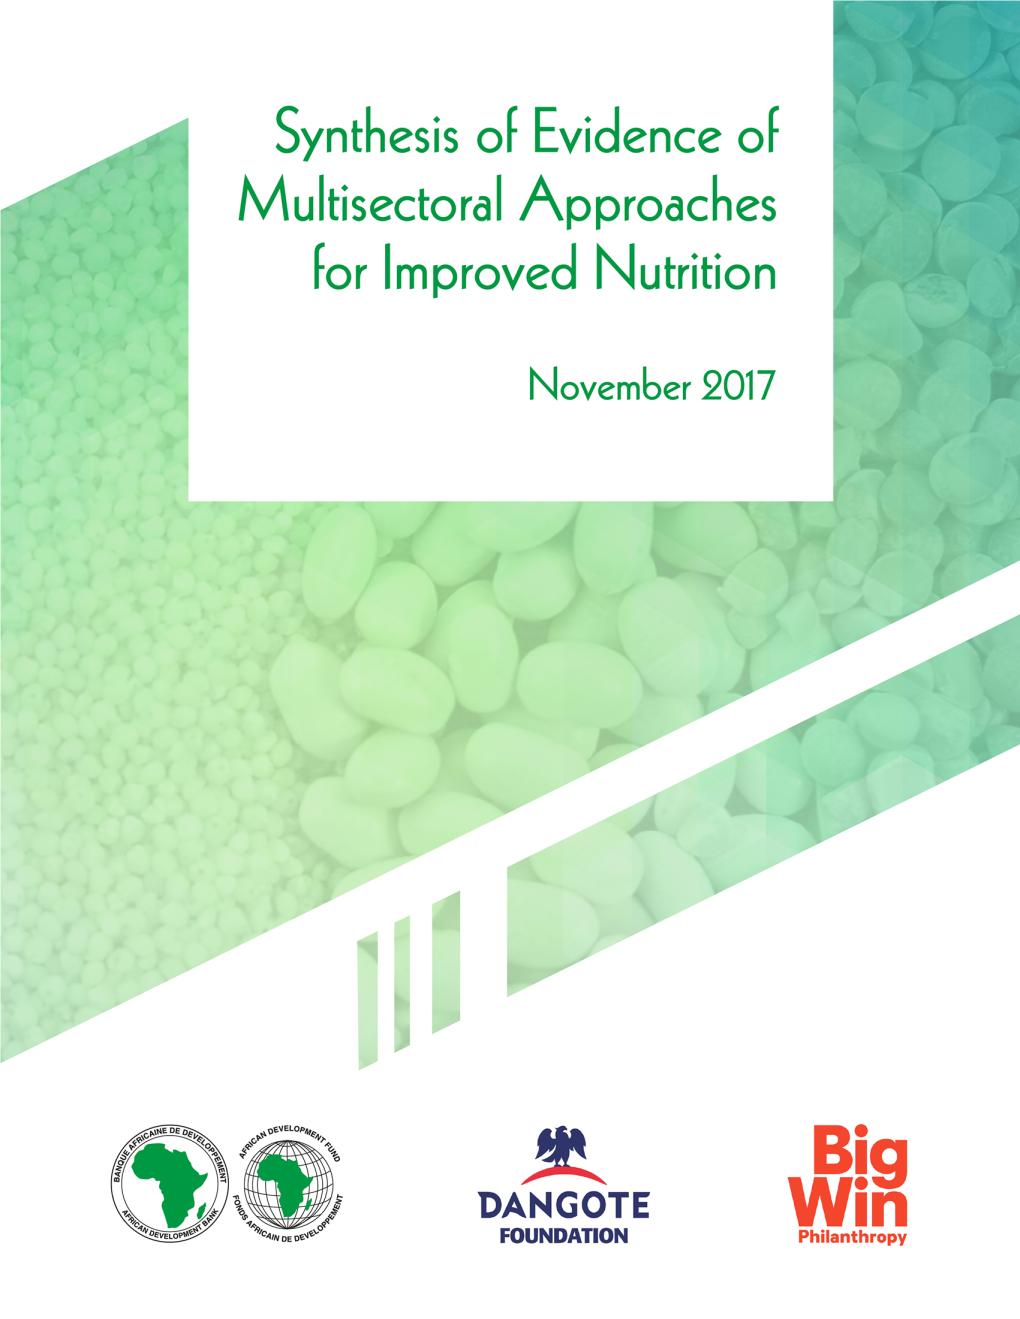 Synthesis of Evidence of Multisectoral Approaches for Improved Nutrition